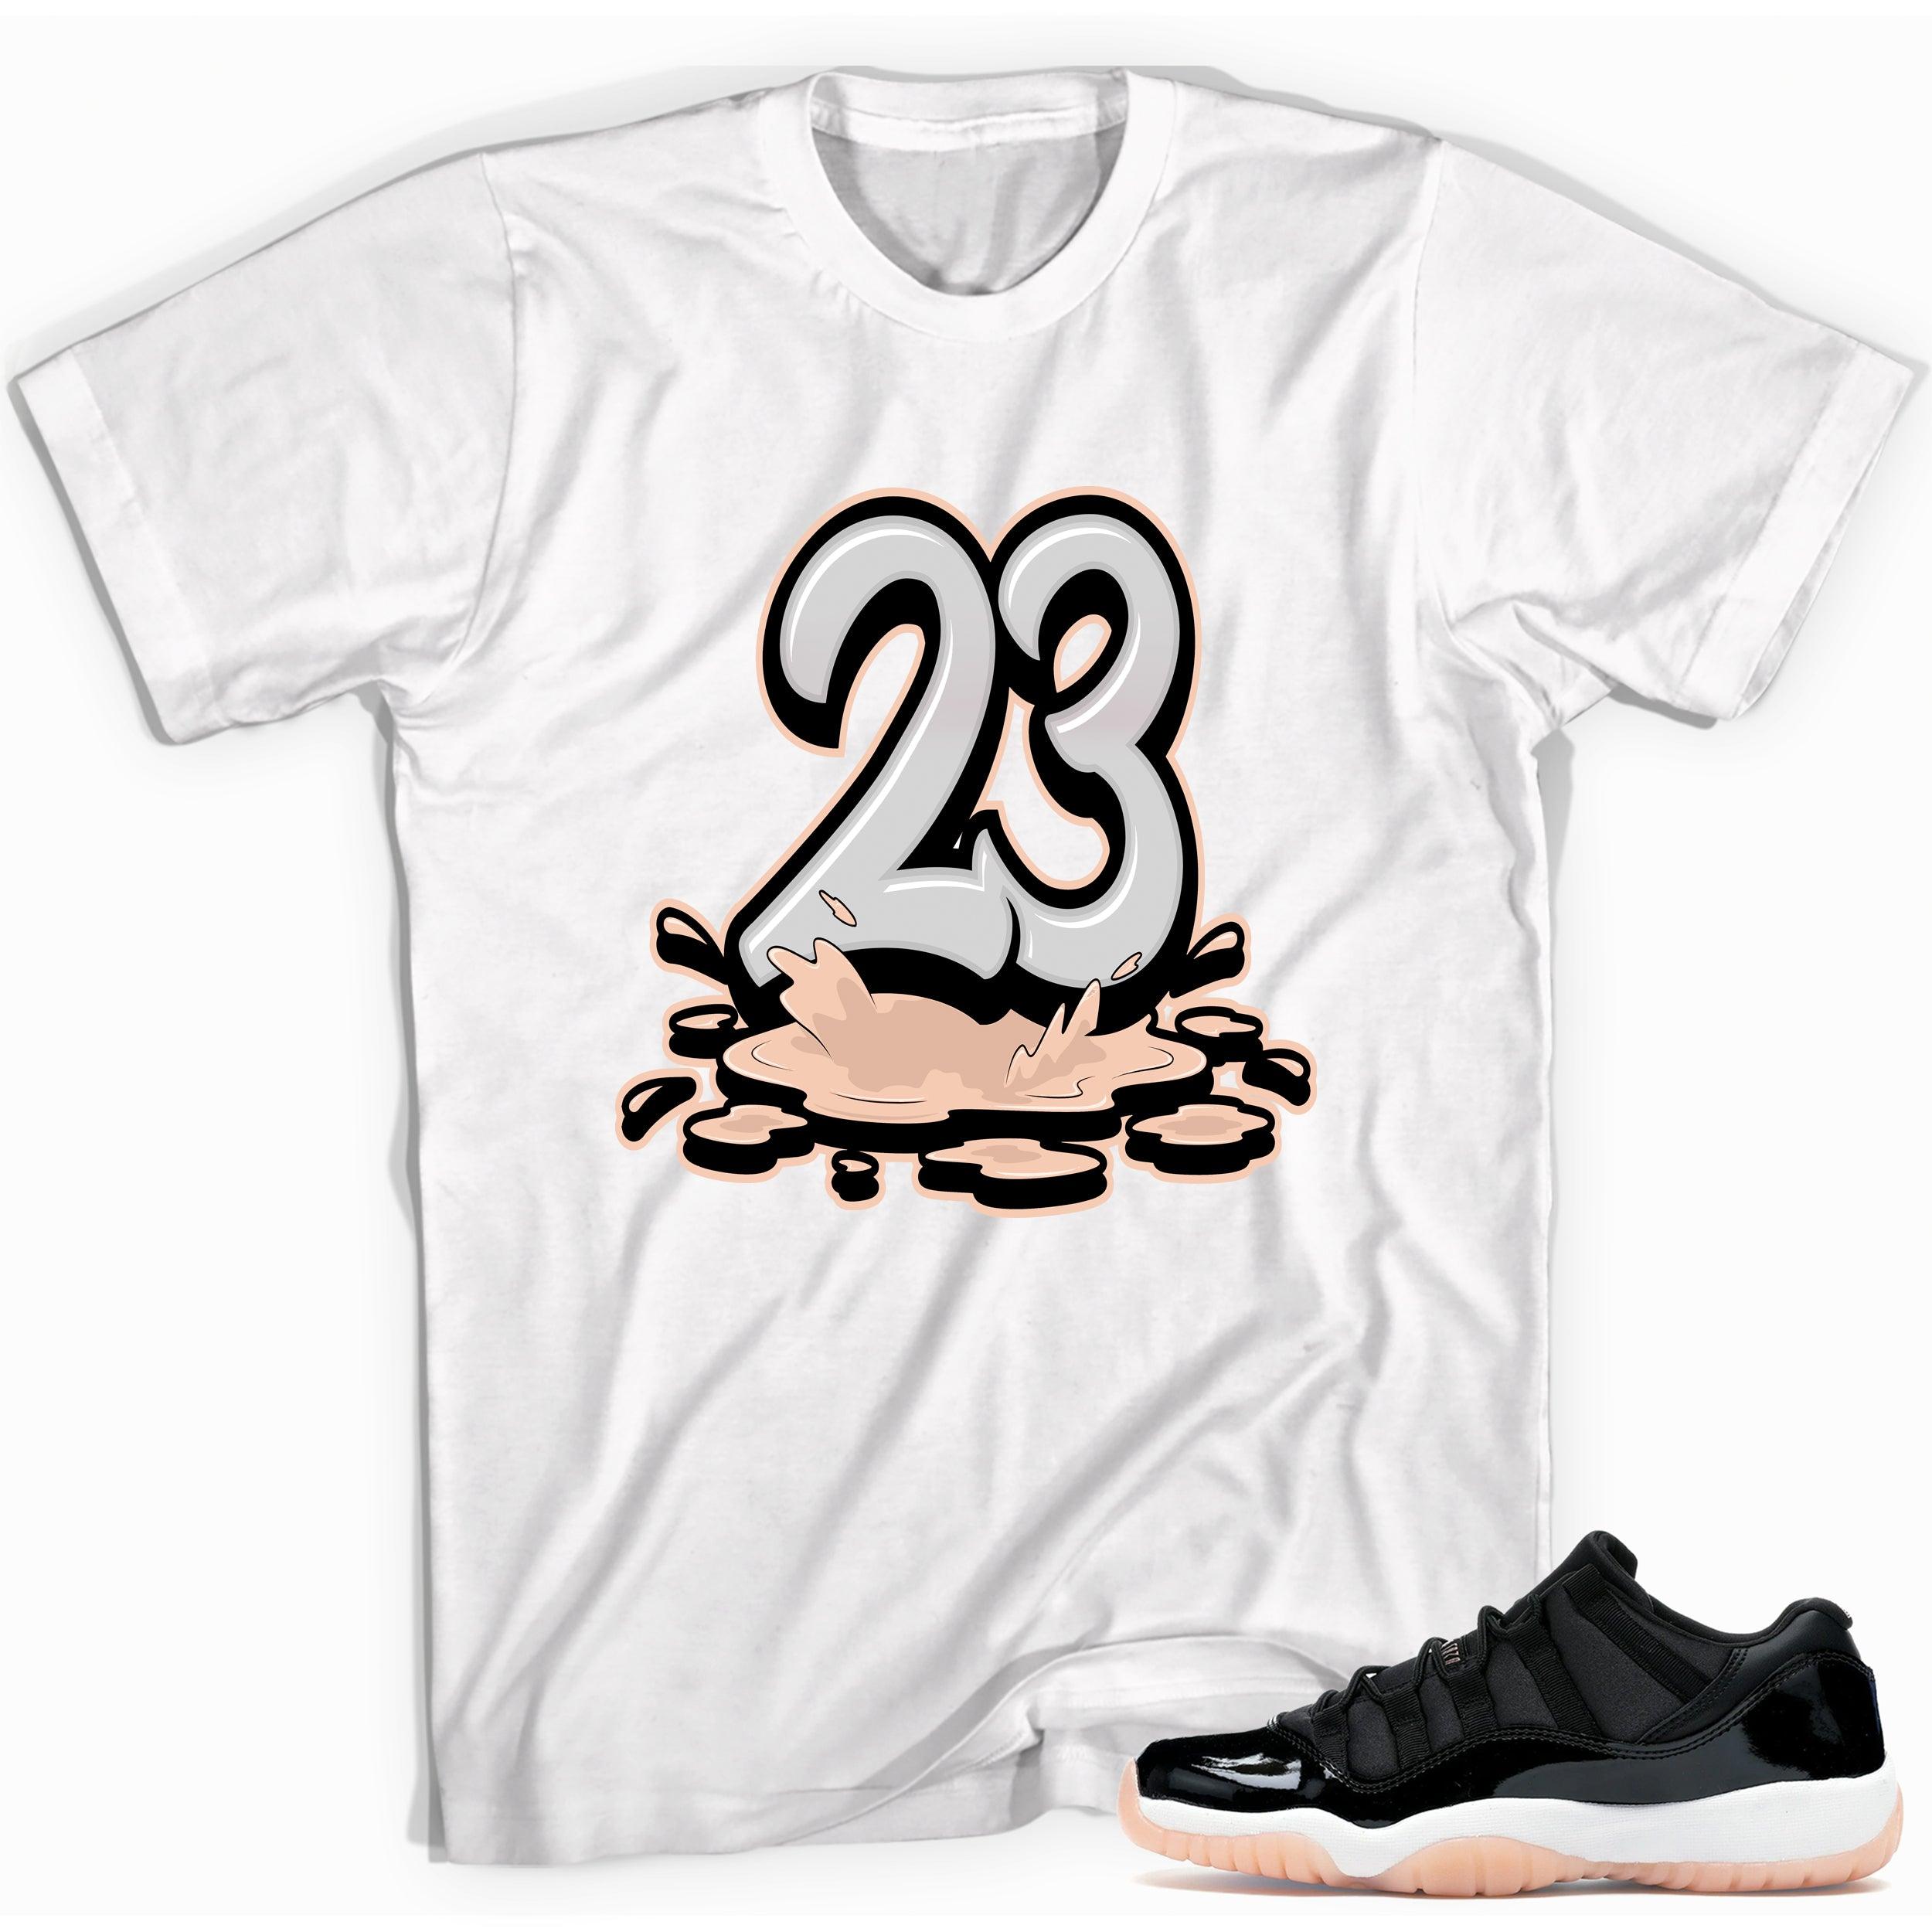 Number 23 Melting Shirt AJ 11 Retro Low Bleached Coral photo